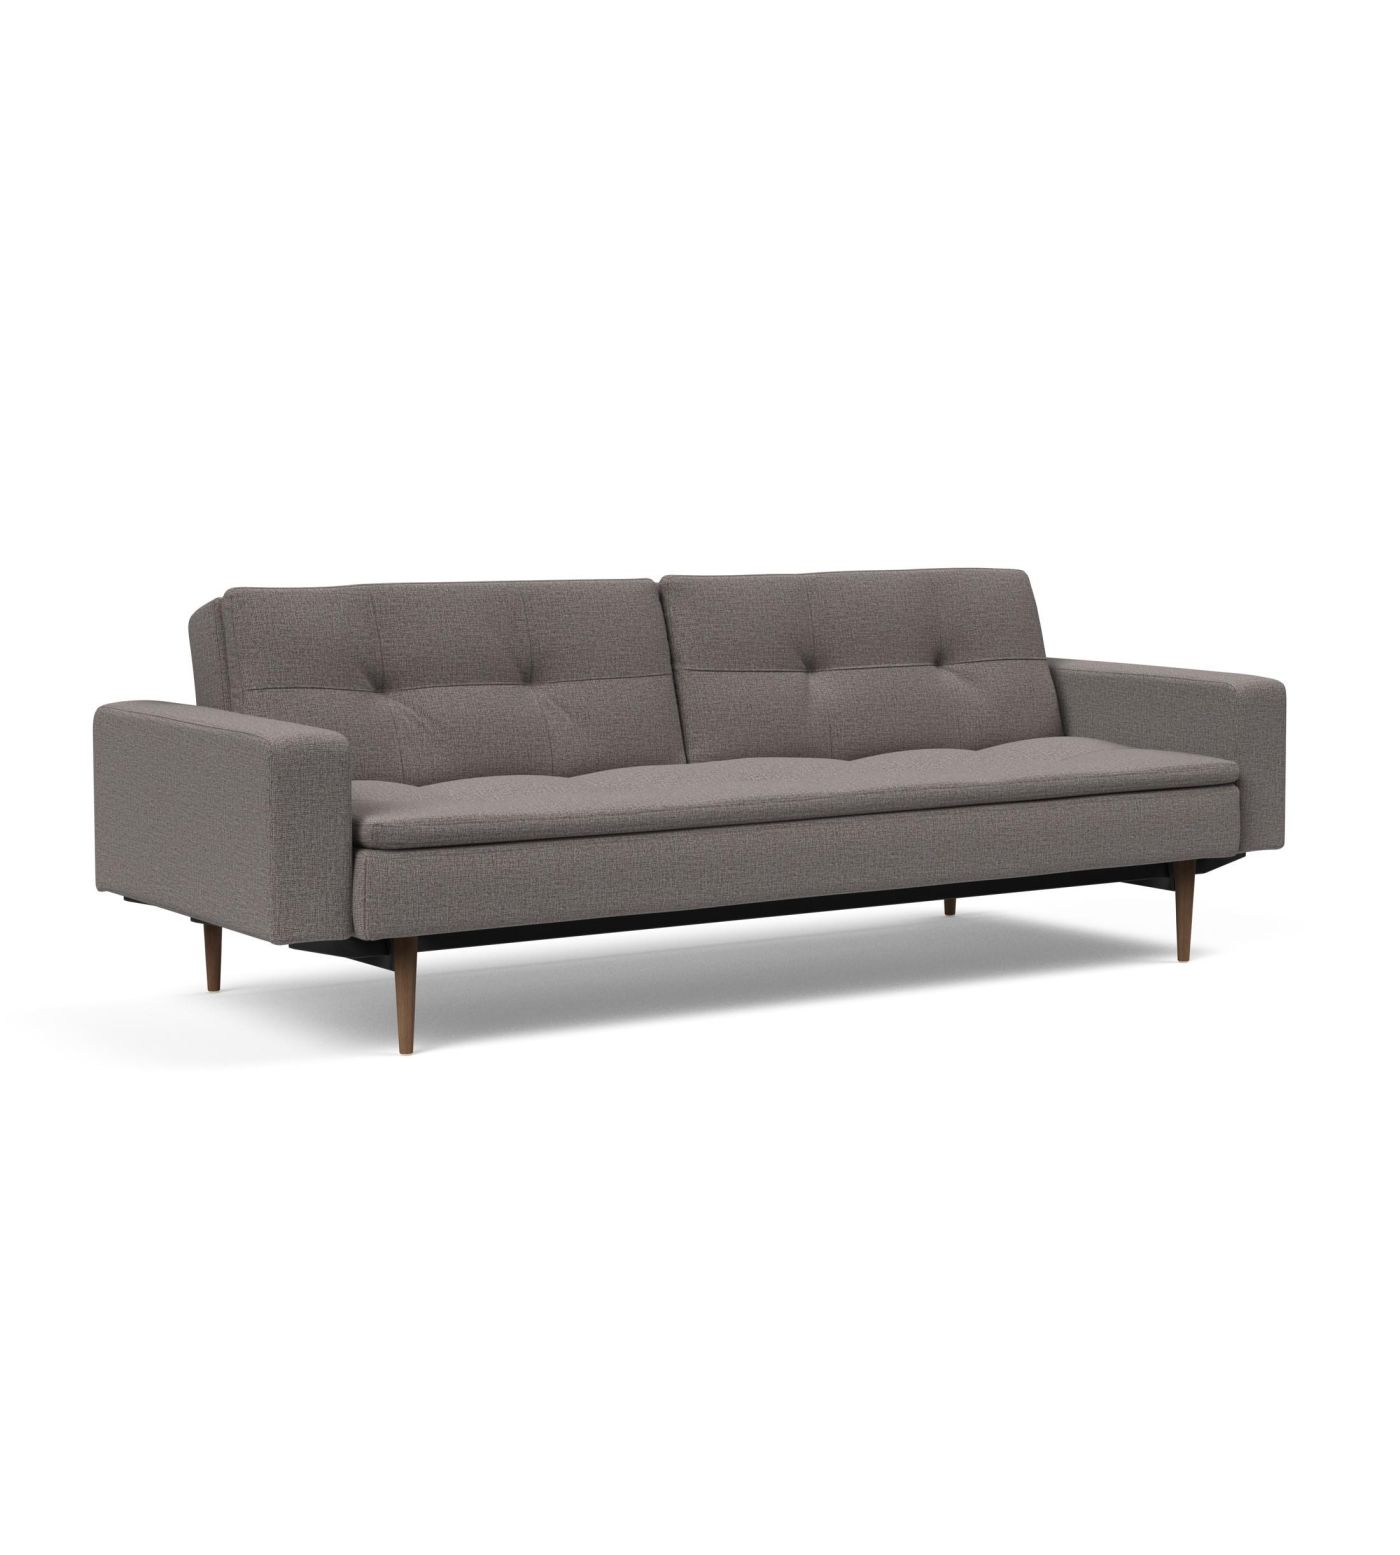 Formode stribe craft Dublexo Styletto Dark Wood Sofa Bed with Arms by Innovation Living | Modern  Sofa Beds | Cressina